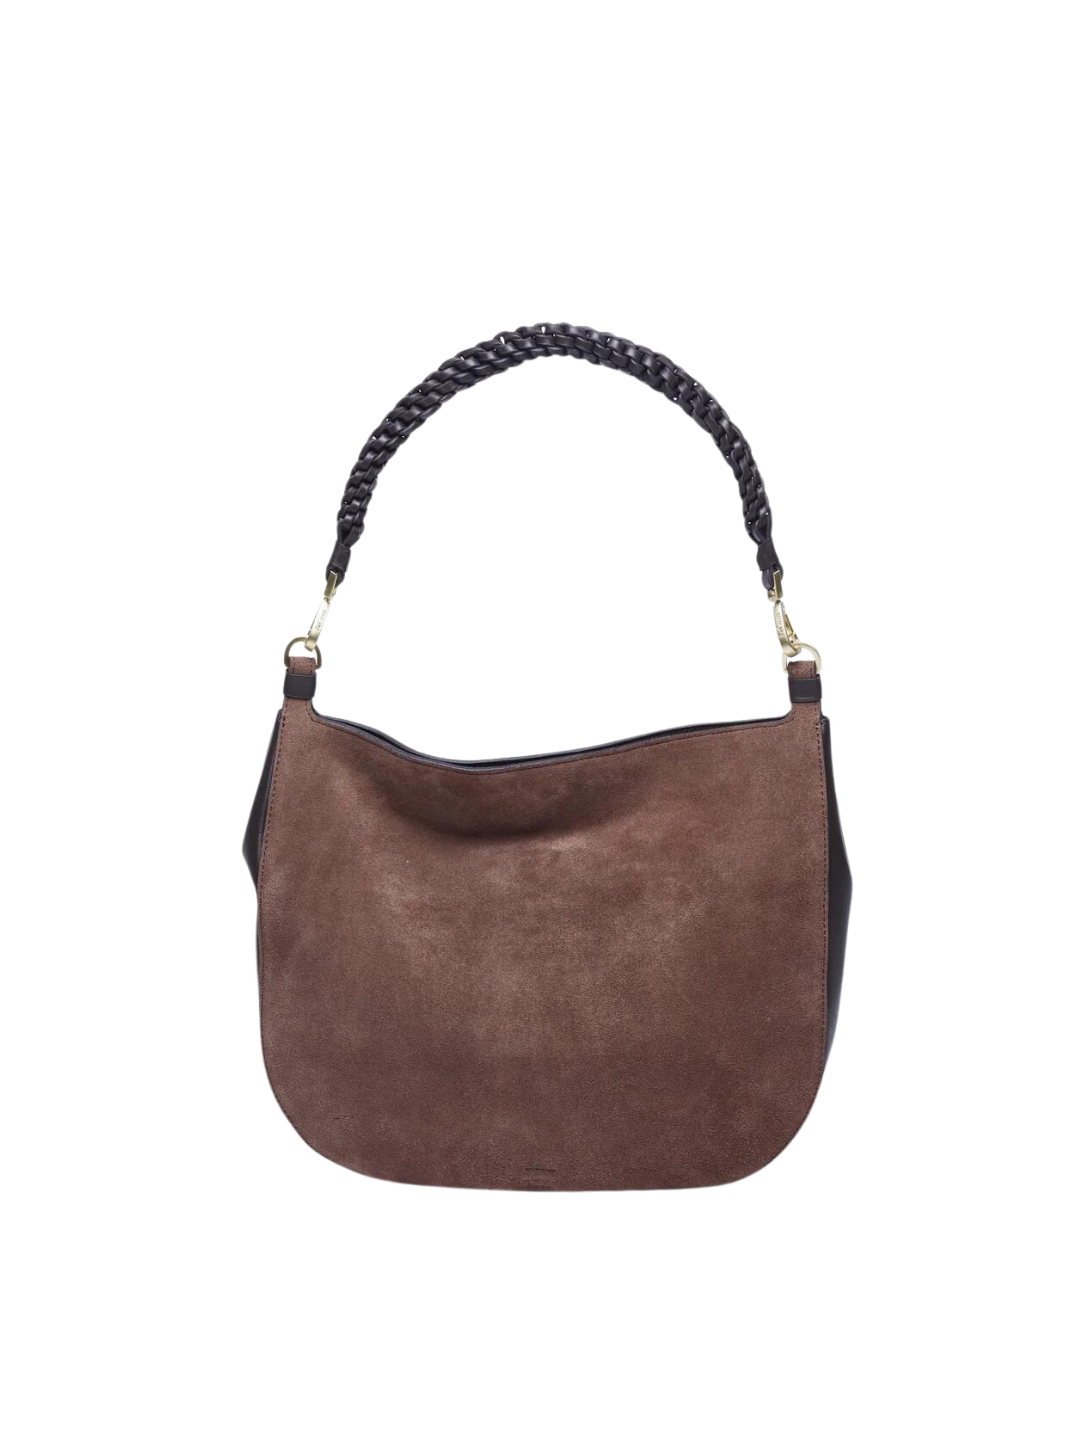 Erica bag ethical handcrafted sustainable women's handbag made from upcycled materials